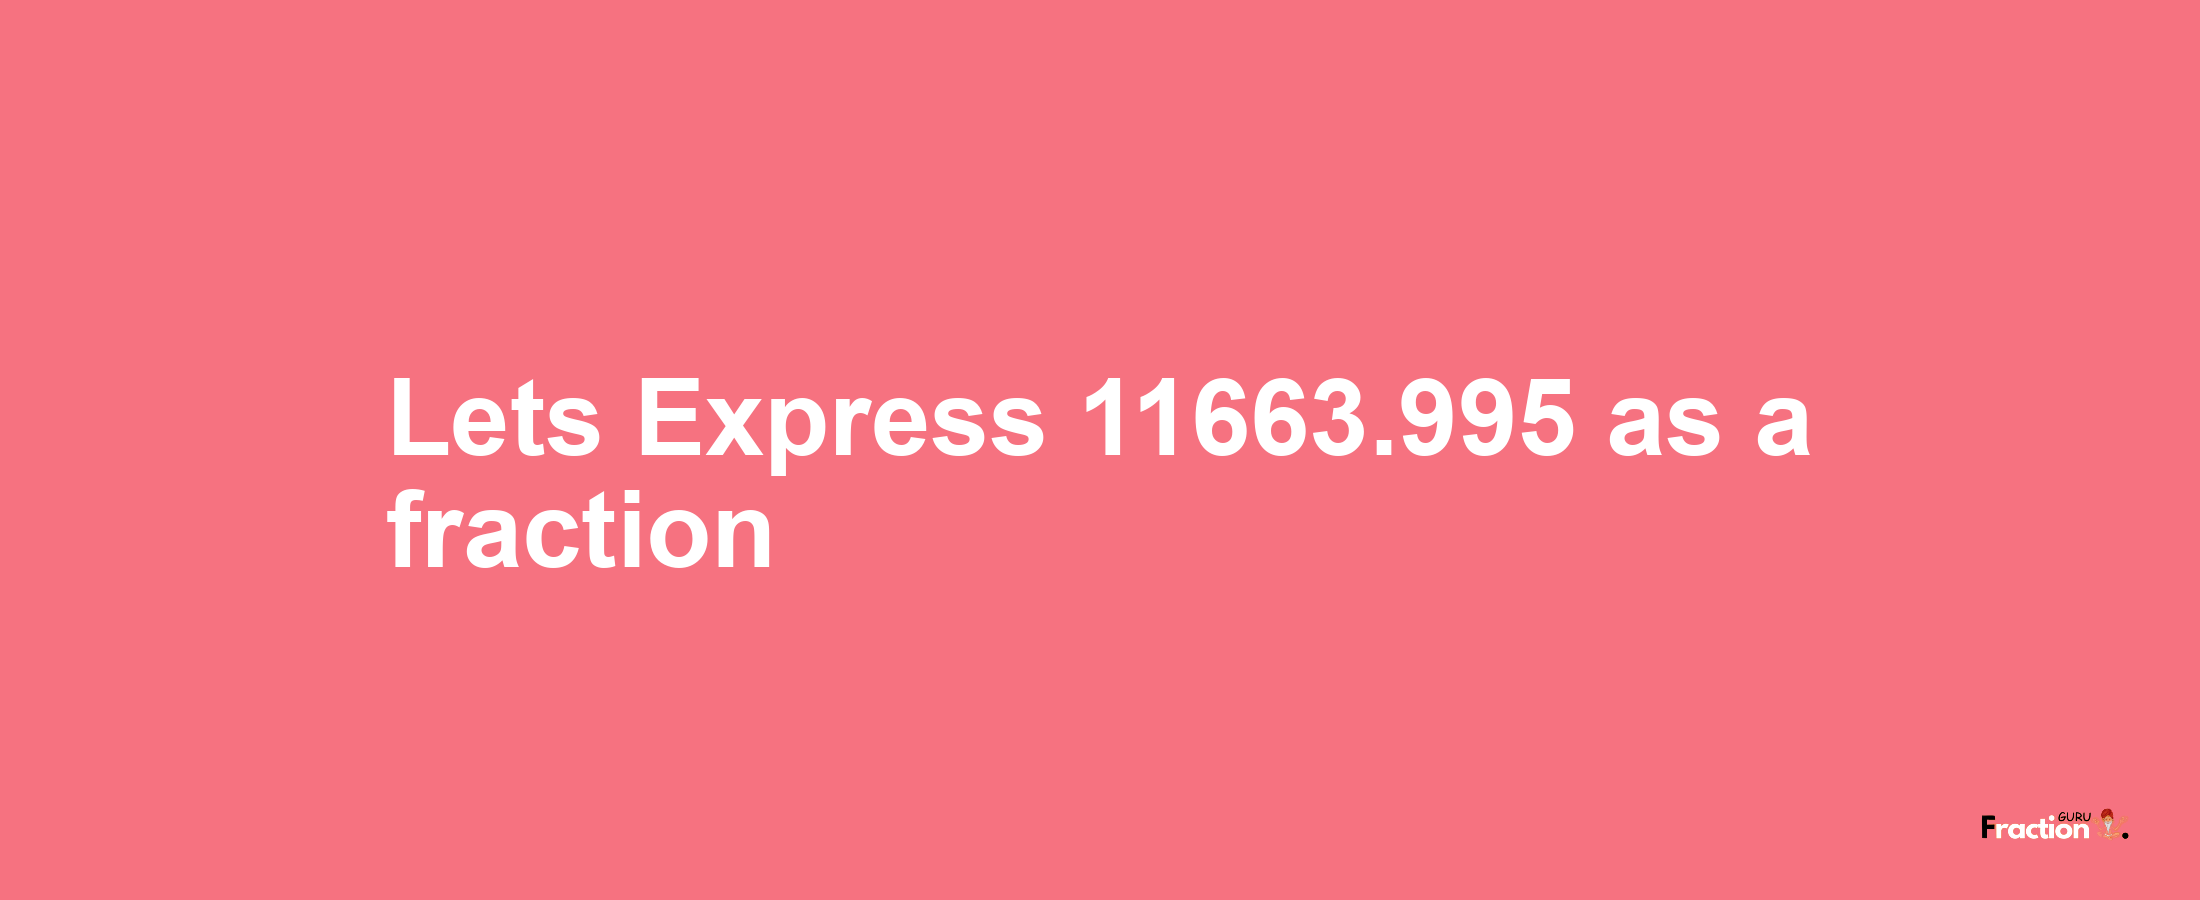 Lets Express 11663.995 as afraction